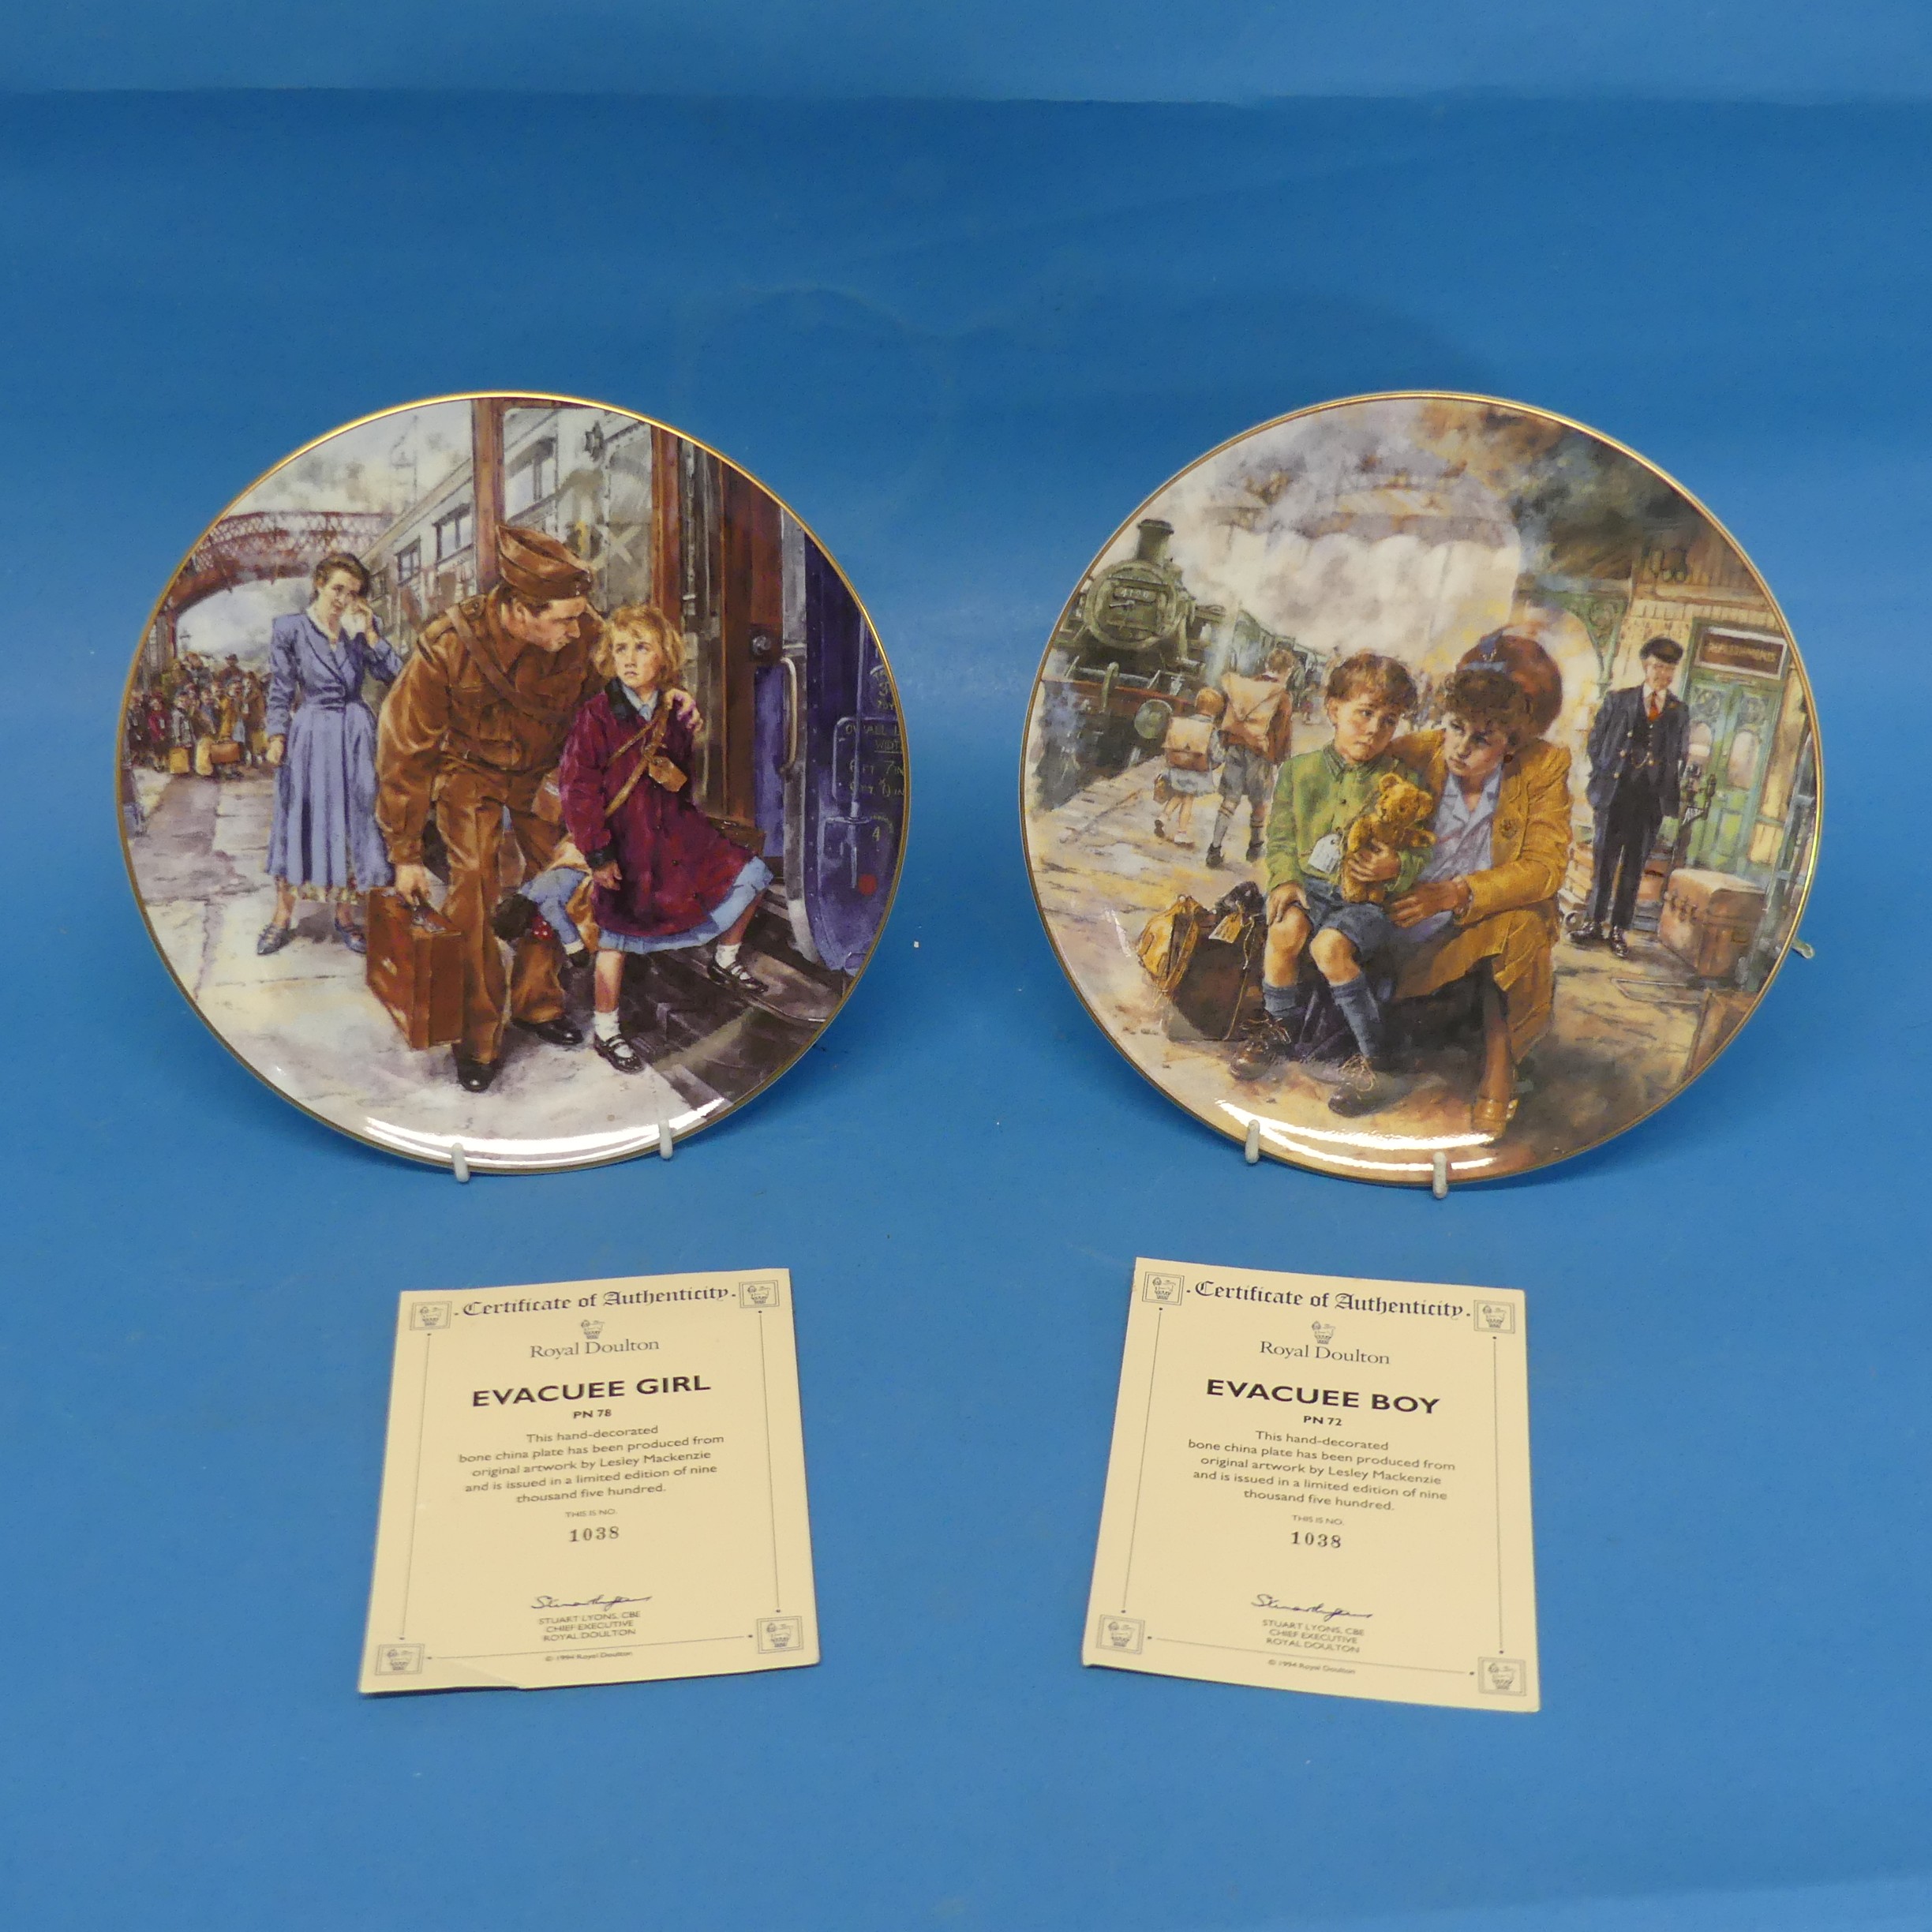 A Royal Doulton 'The Girl Evacuee' seriesware Plate, together with 'The Boy Evacuee' Plate, both